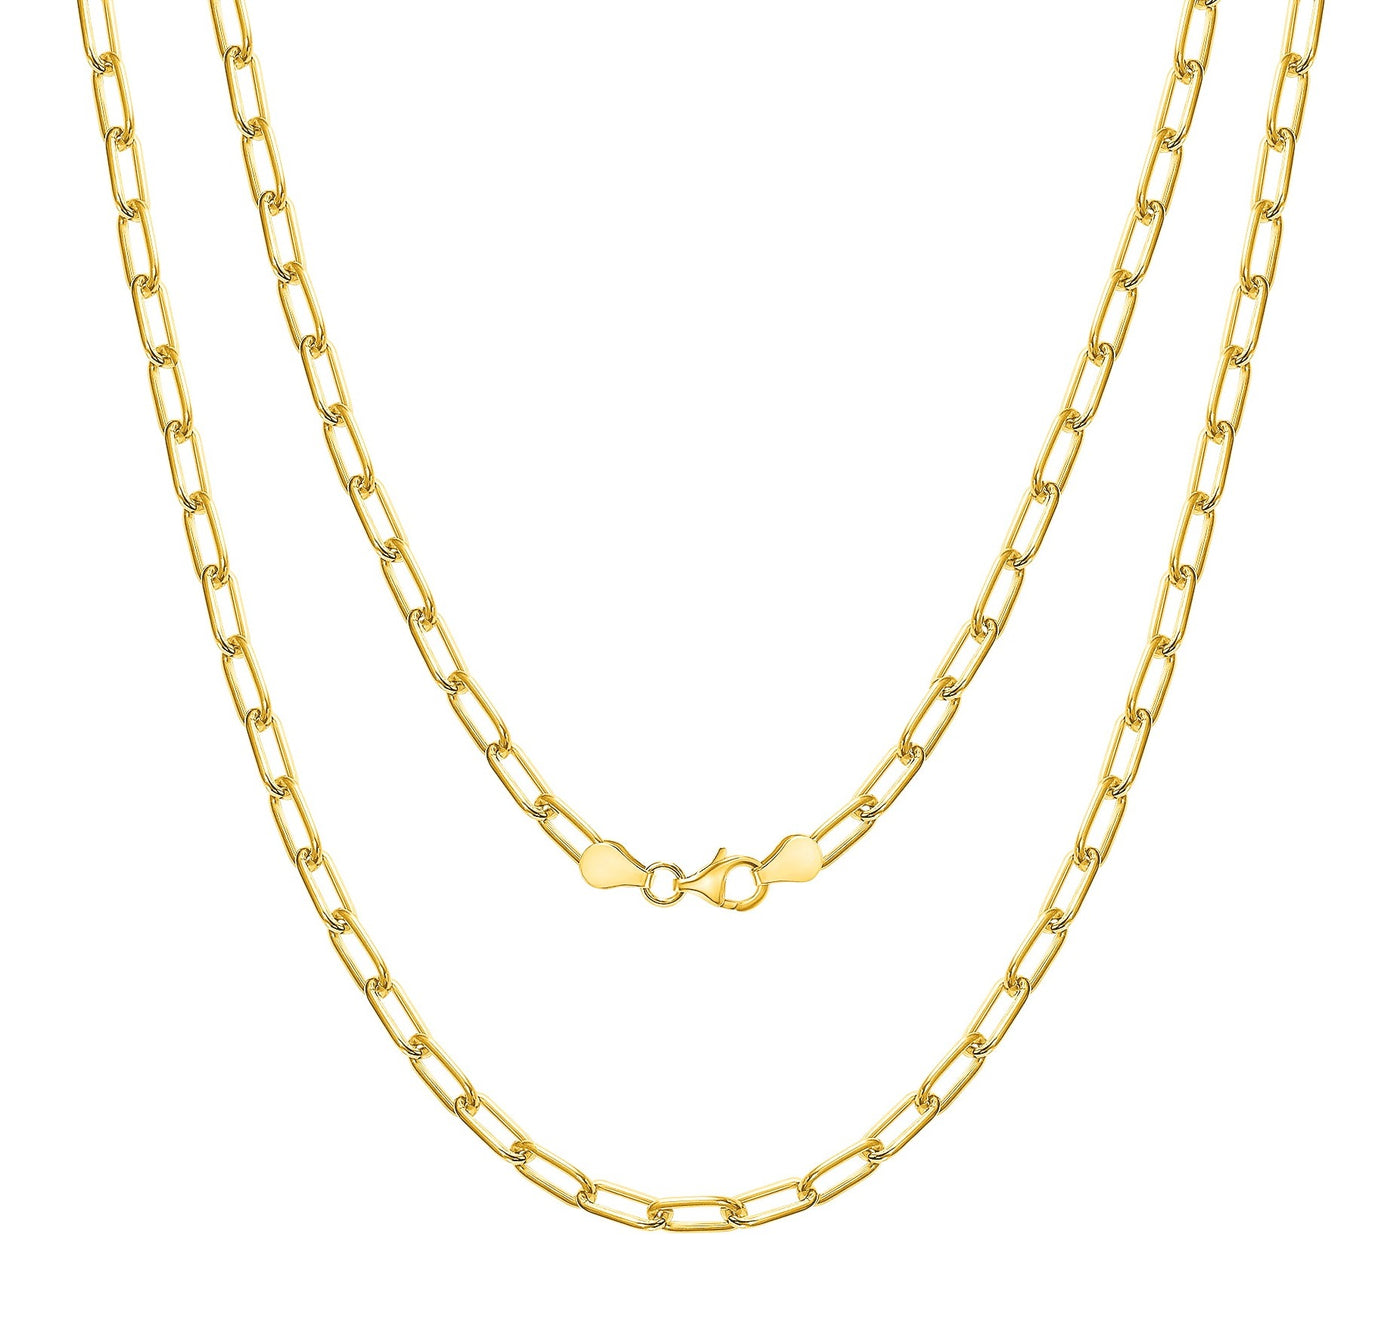 Italian Sterling Silver Gold Plated 4mm Paperclip Link Chain Necklace Bracelet 7"- 24"